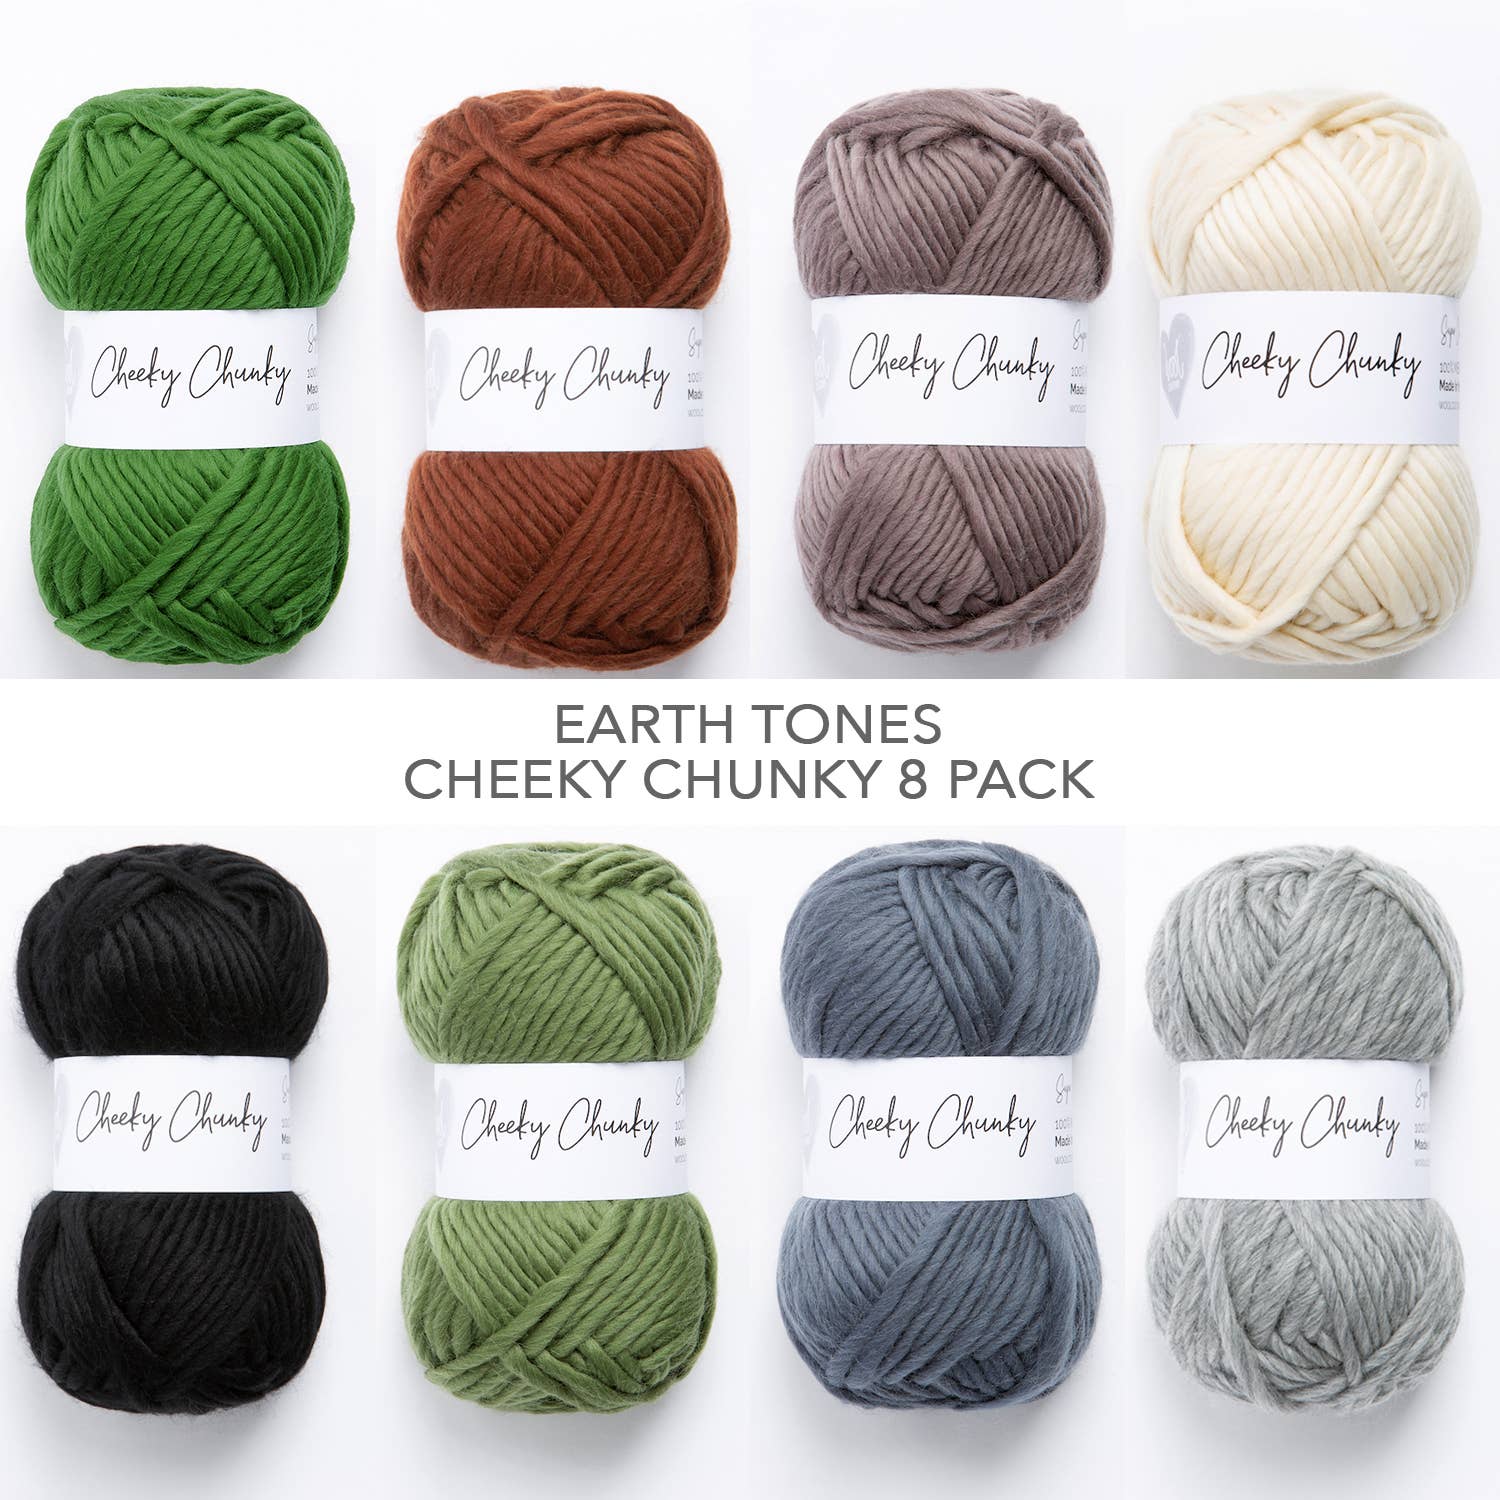 Wholesale Cheeky Chunky Yarn Earth Tones Bundle - 8 Pack for your